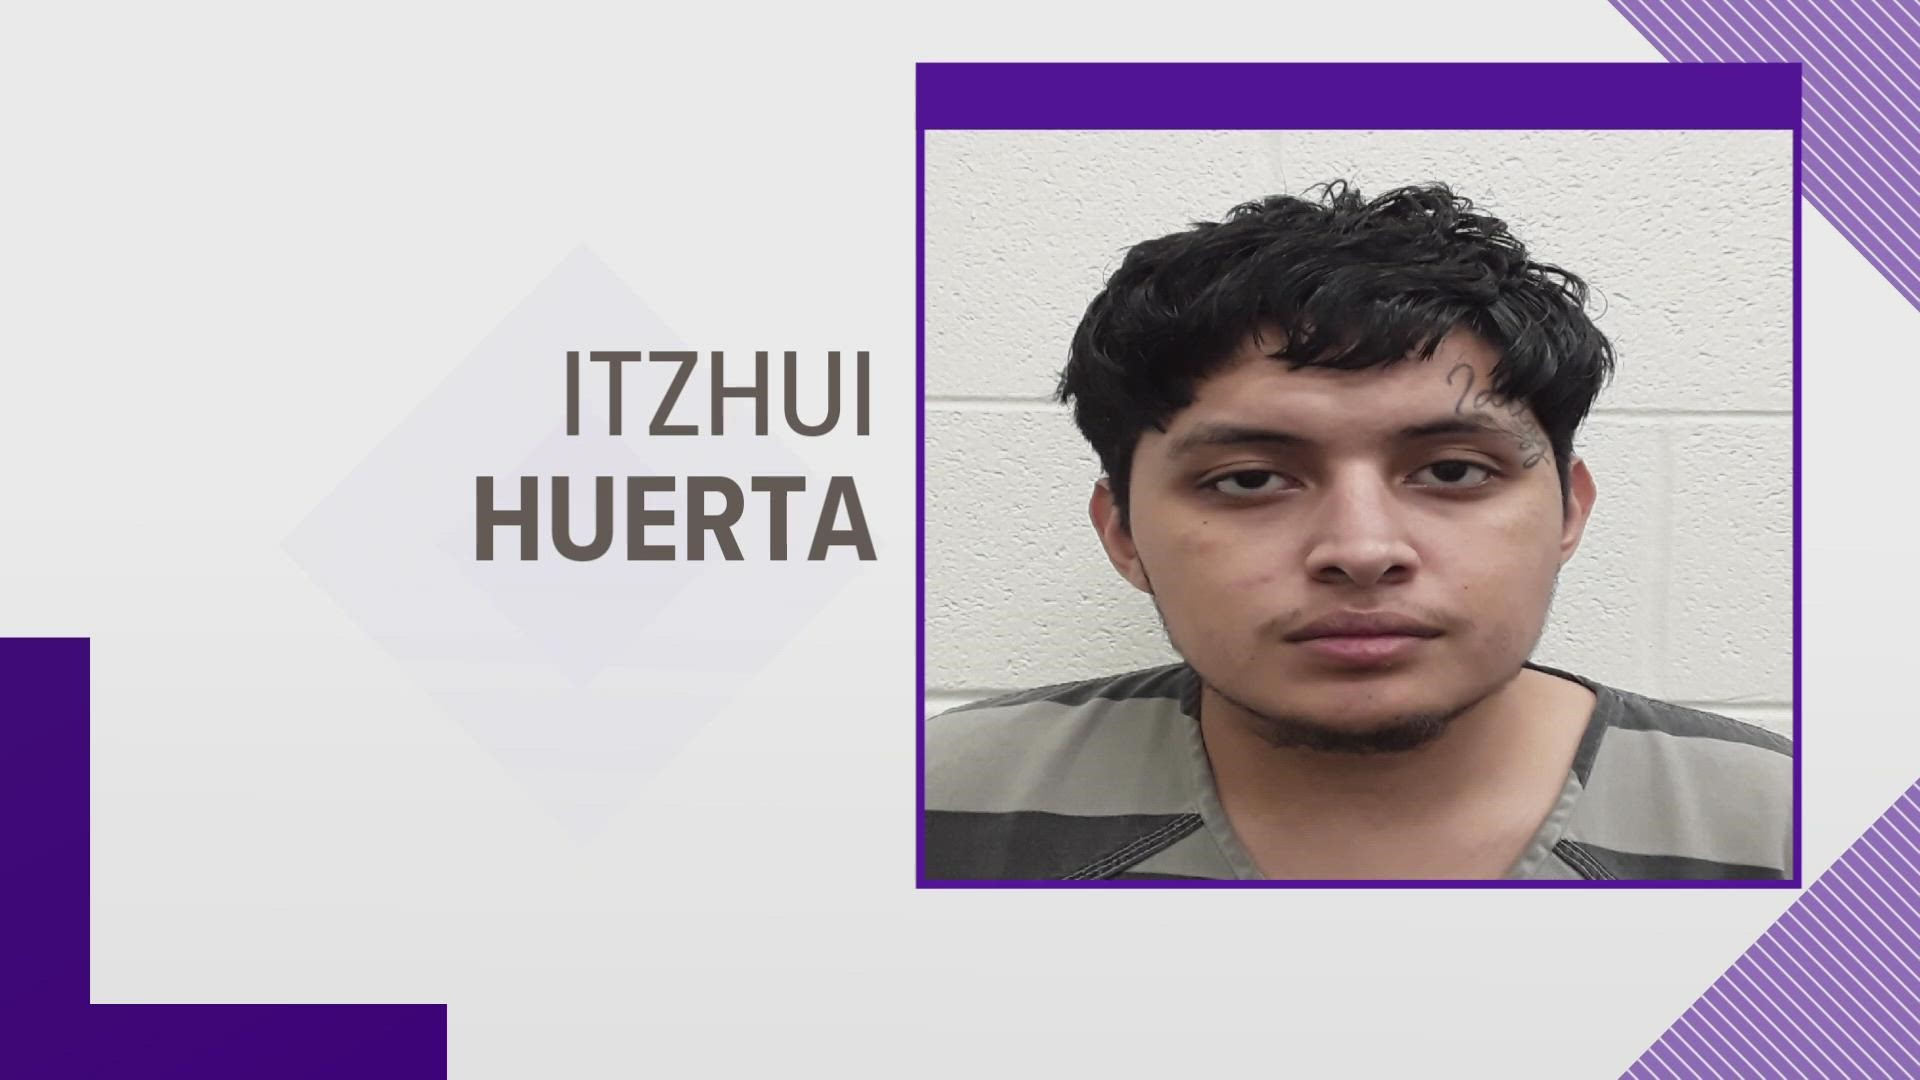 According to records from the Monroe County Sheriff, Itzhui Huerta is now in custody.
He faces multiple charges. Two people died, including a two-year-old girl.